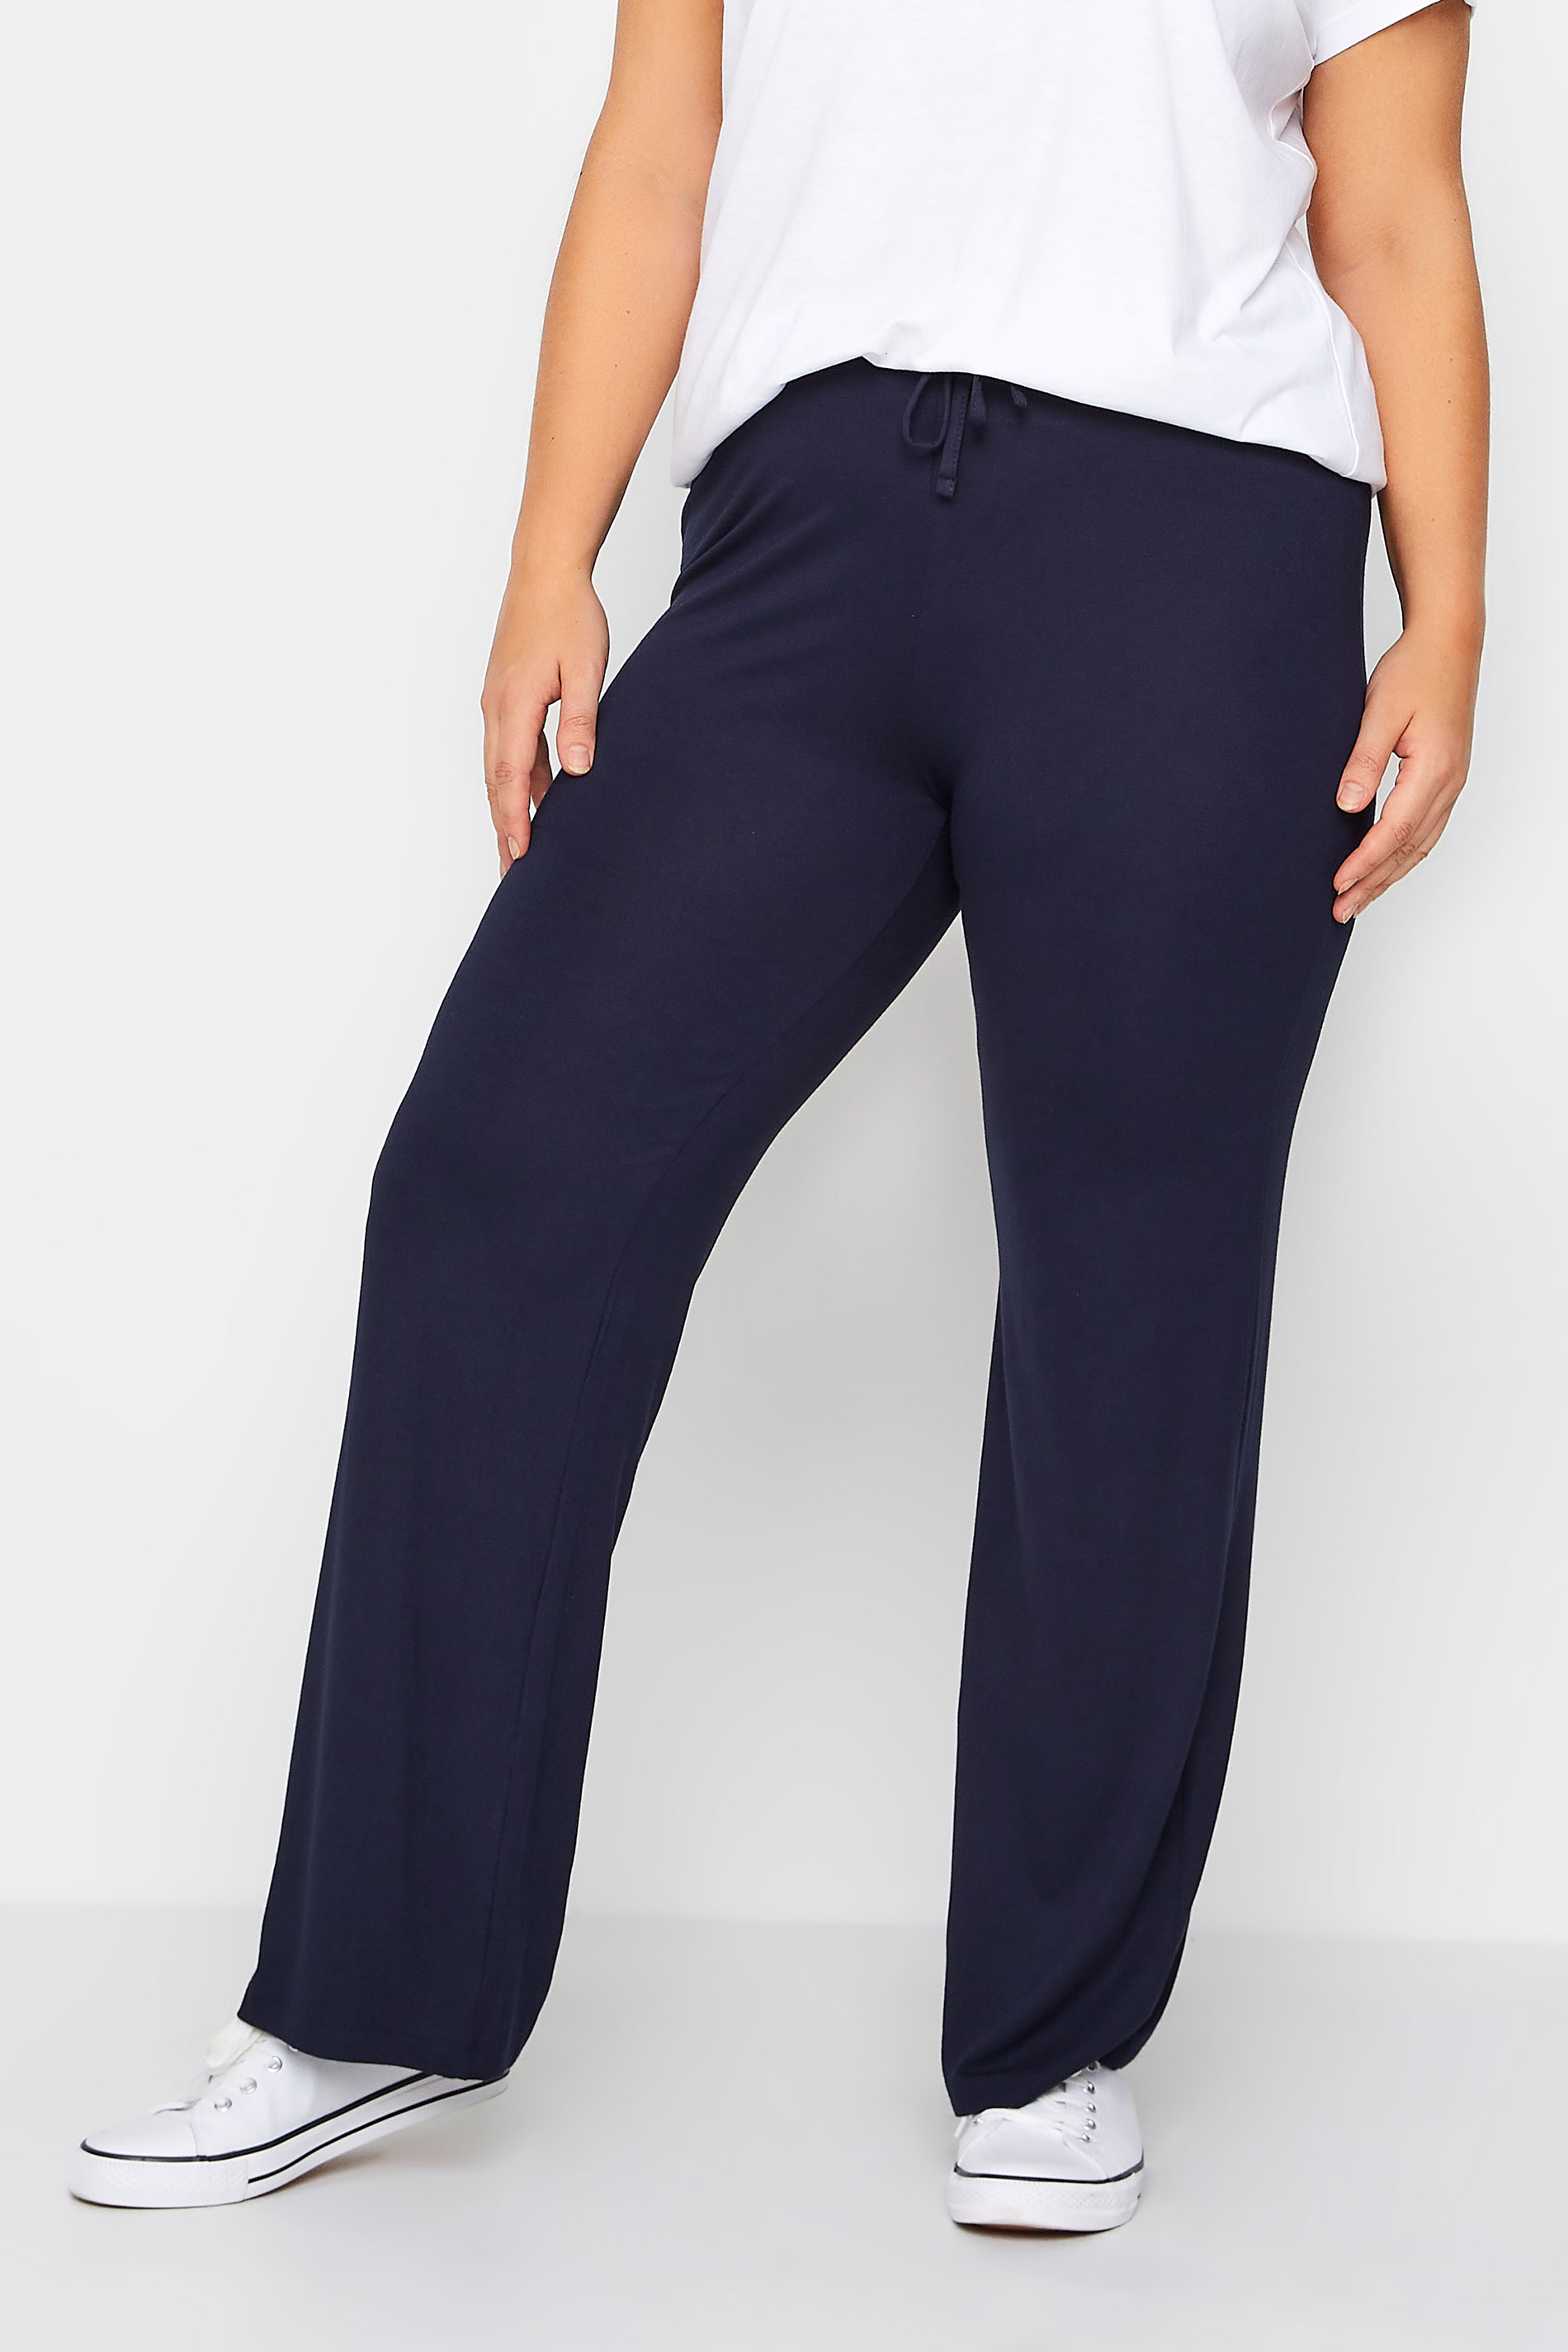 Plus Size Navy Blue Wide Leg Pull On Stretch Jersey Yoga Pants | Yours Clothing 1